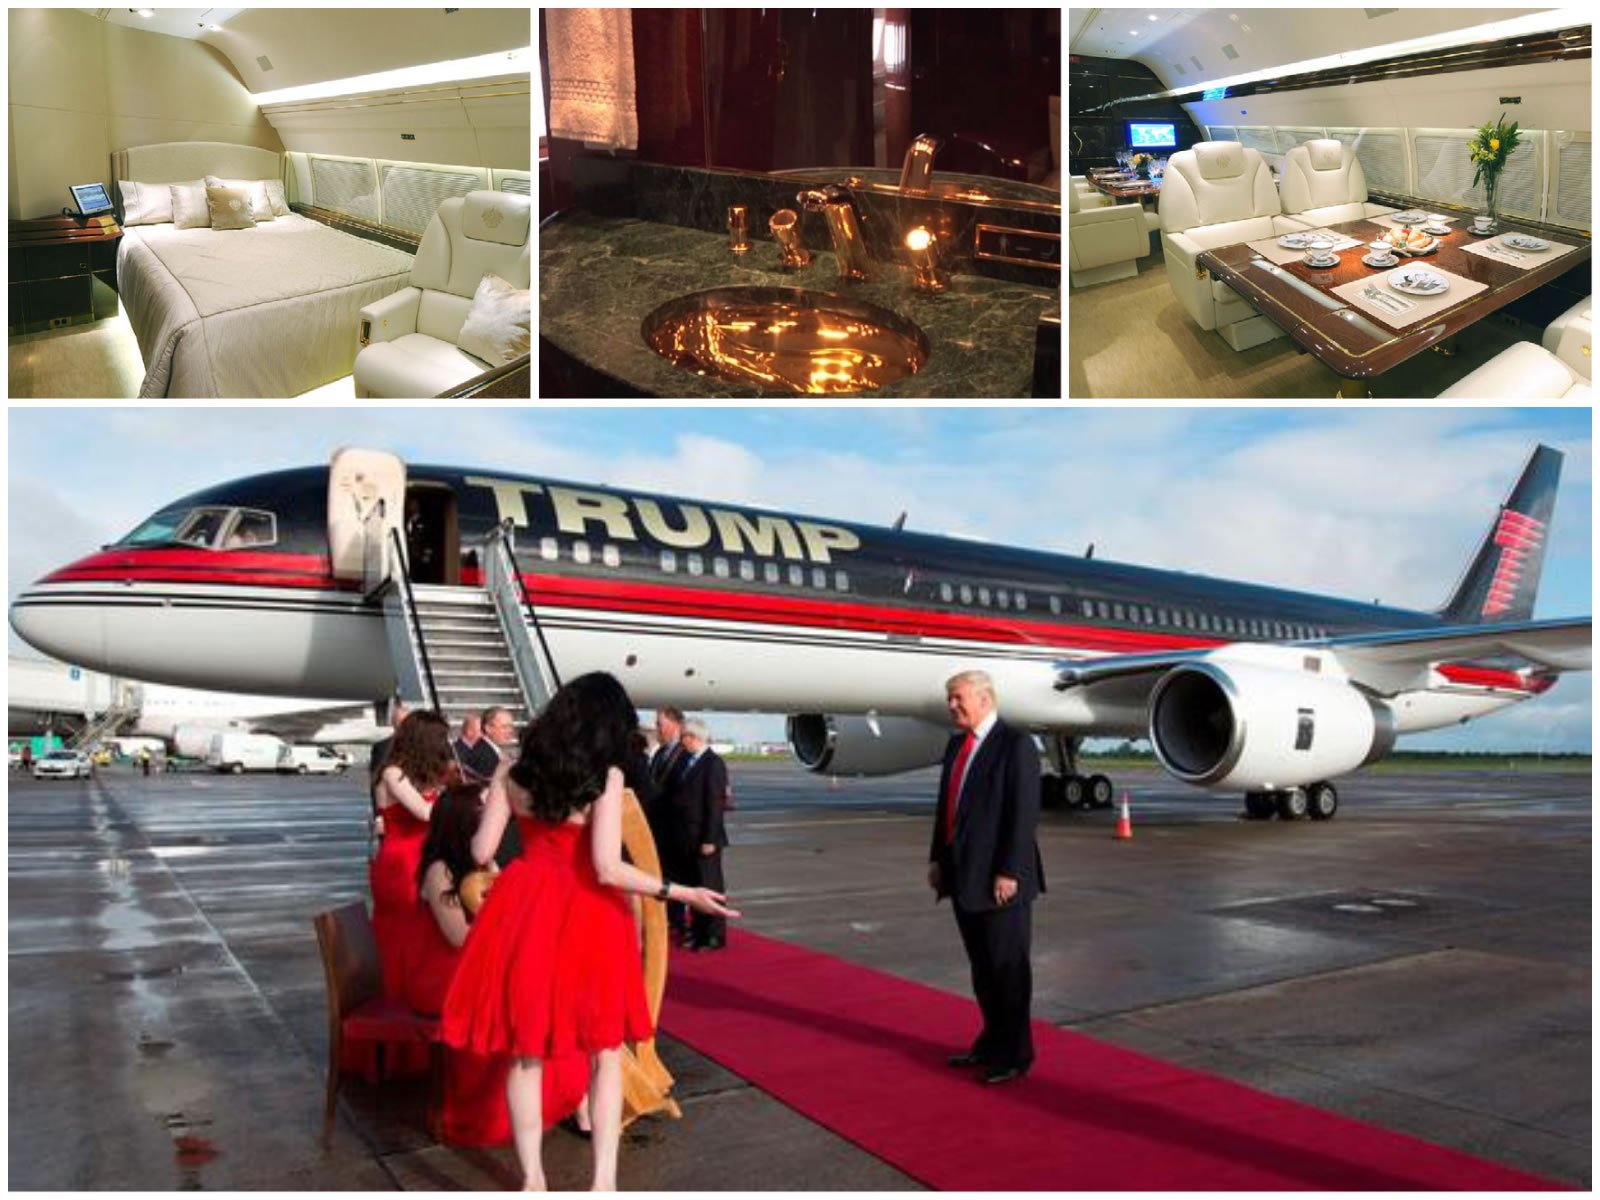 Fitted with gold bathroom fittings and seat buckles, Donald Trump’s prized $100 million Boeing 757 private jet is rotting away with an engine removed. Will Trump be flying commercial soon?